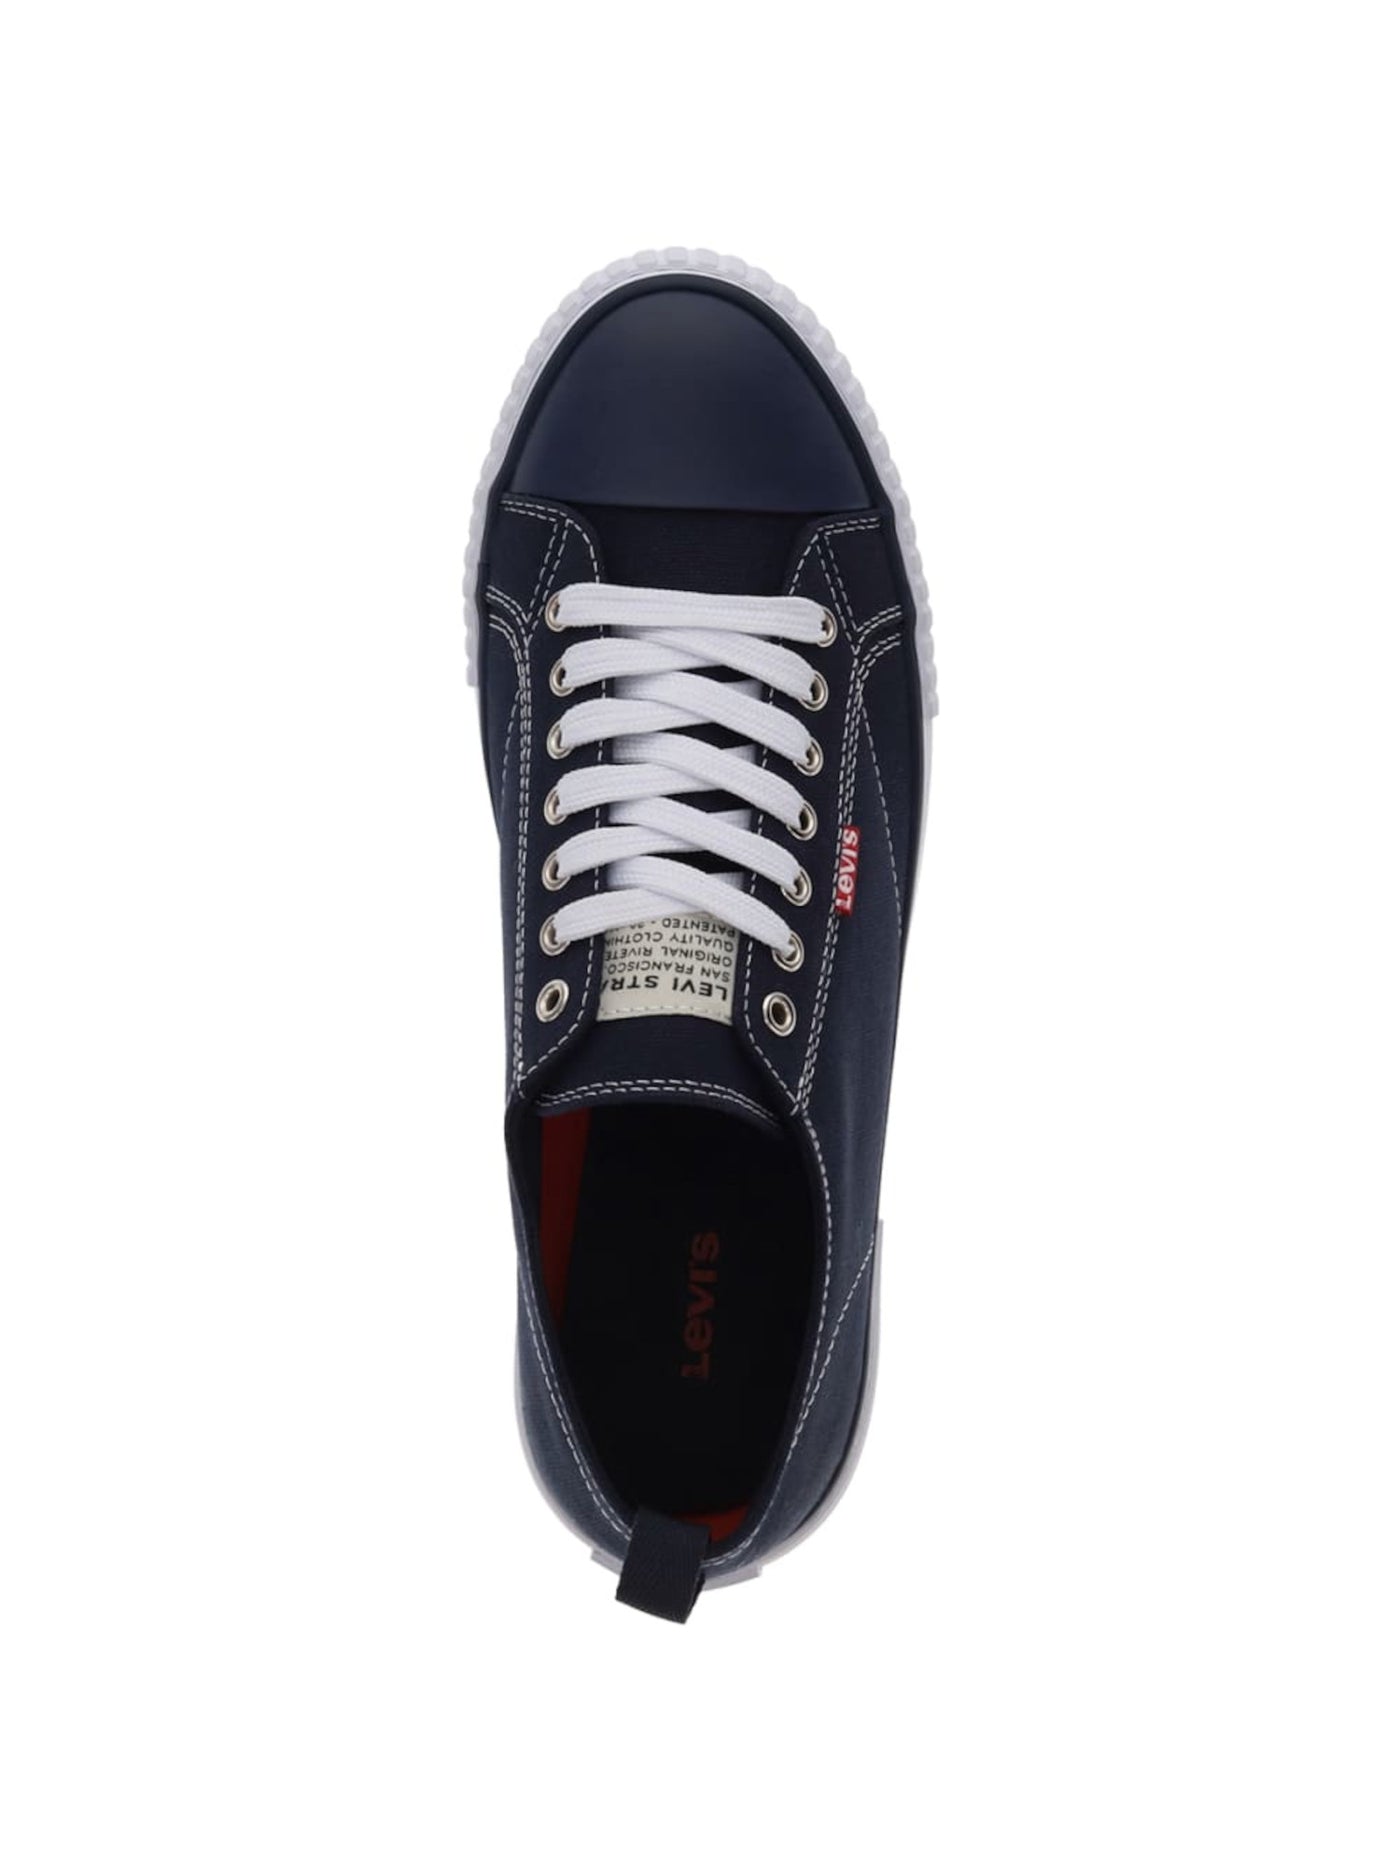 LEVI'S Mens Navy Removable Insole Cushioned Anikin Round Toe Lace-Up Sneakers Shoes 10.5